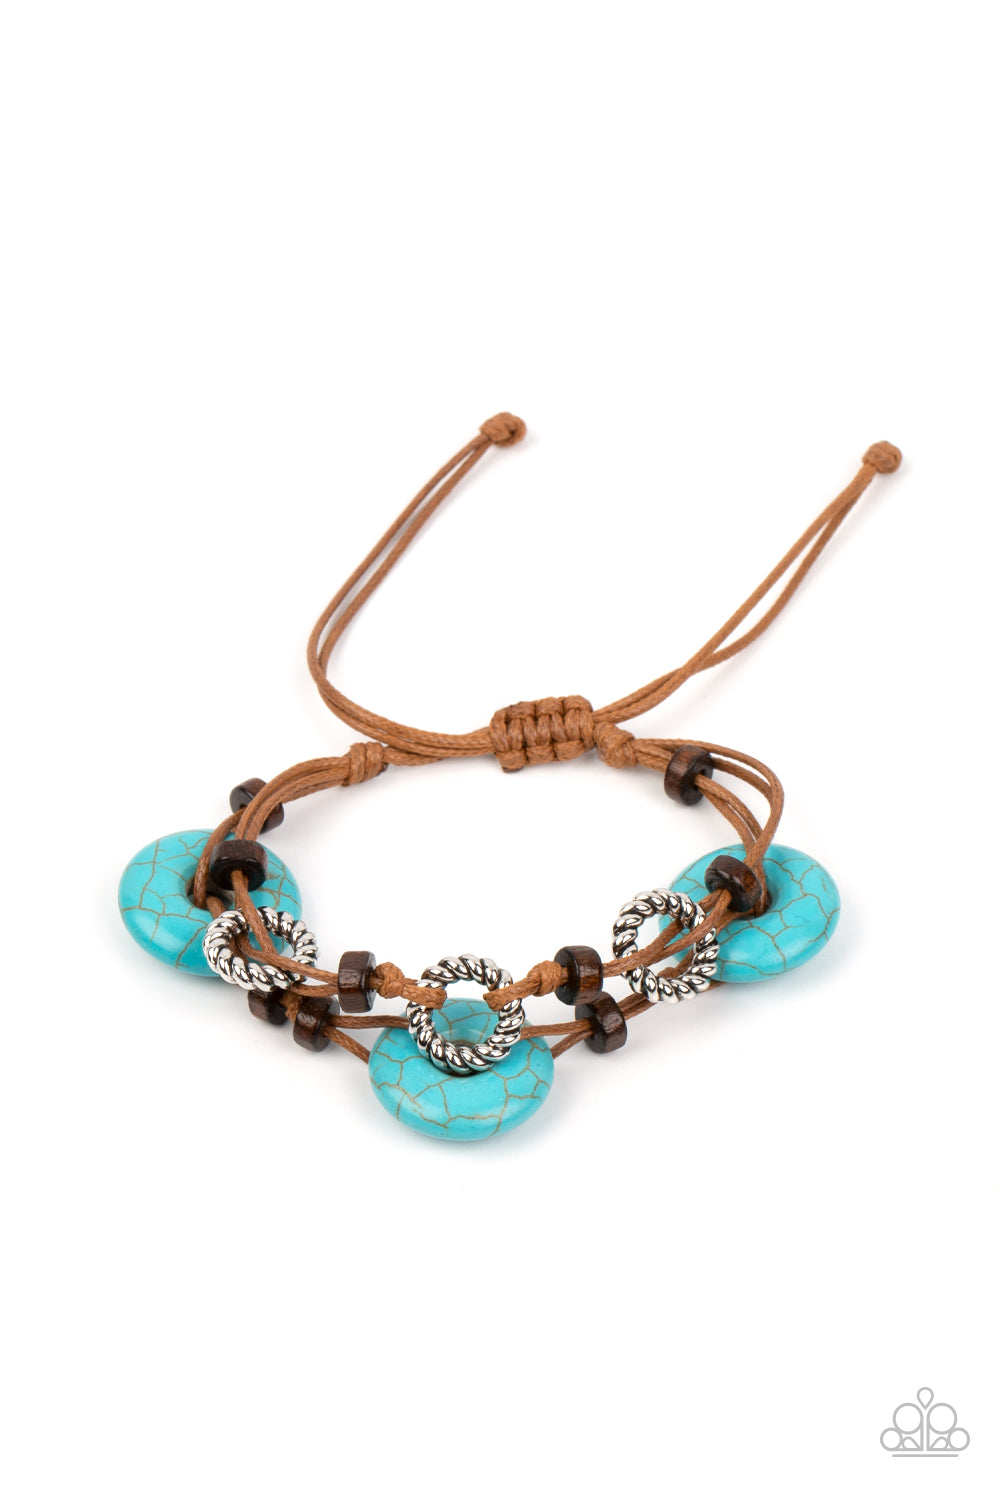 Quarry Quandary - Blue Turquoise Wood Bracelet - Paparazzi Accessories - An earthy assortment of wooden beads, textured silver rings, and turquoise stone discs are knotted in place along two brown suede cords, for adventurous layers around the wrist.